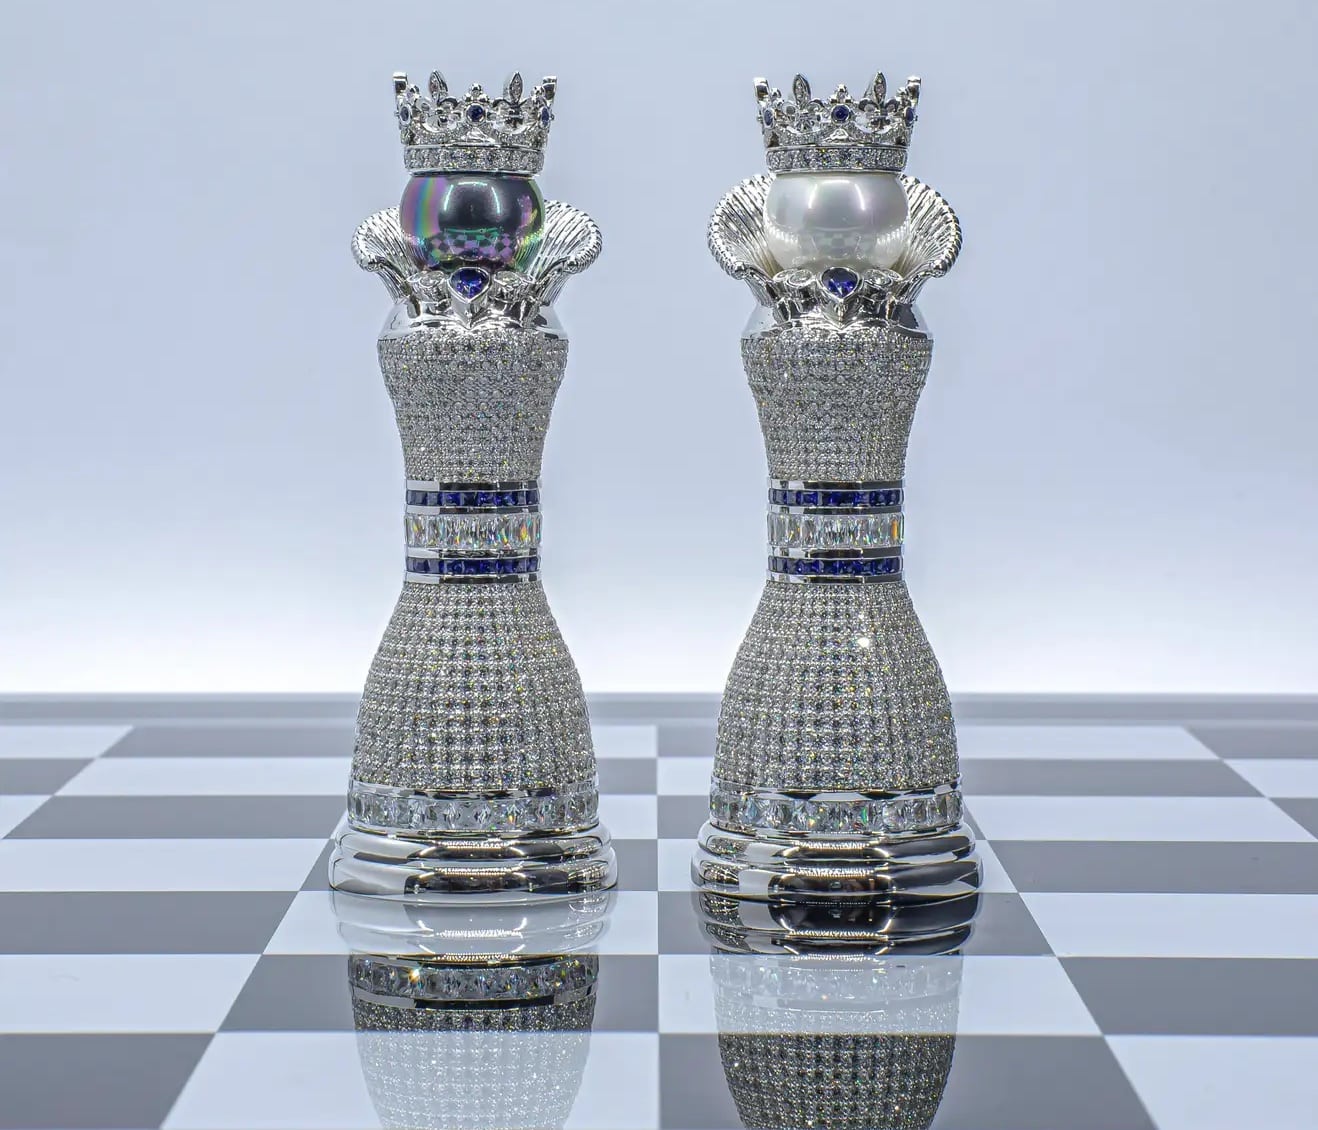 What Makes a Gem-Encrusted Chess Set Worth $4 Million?